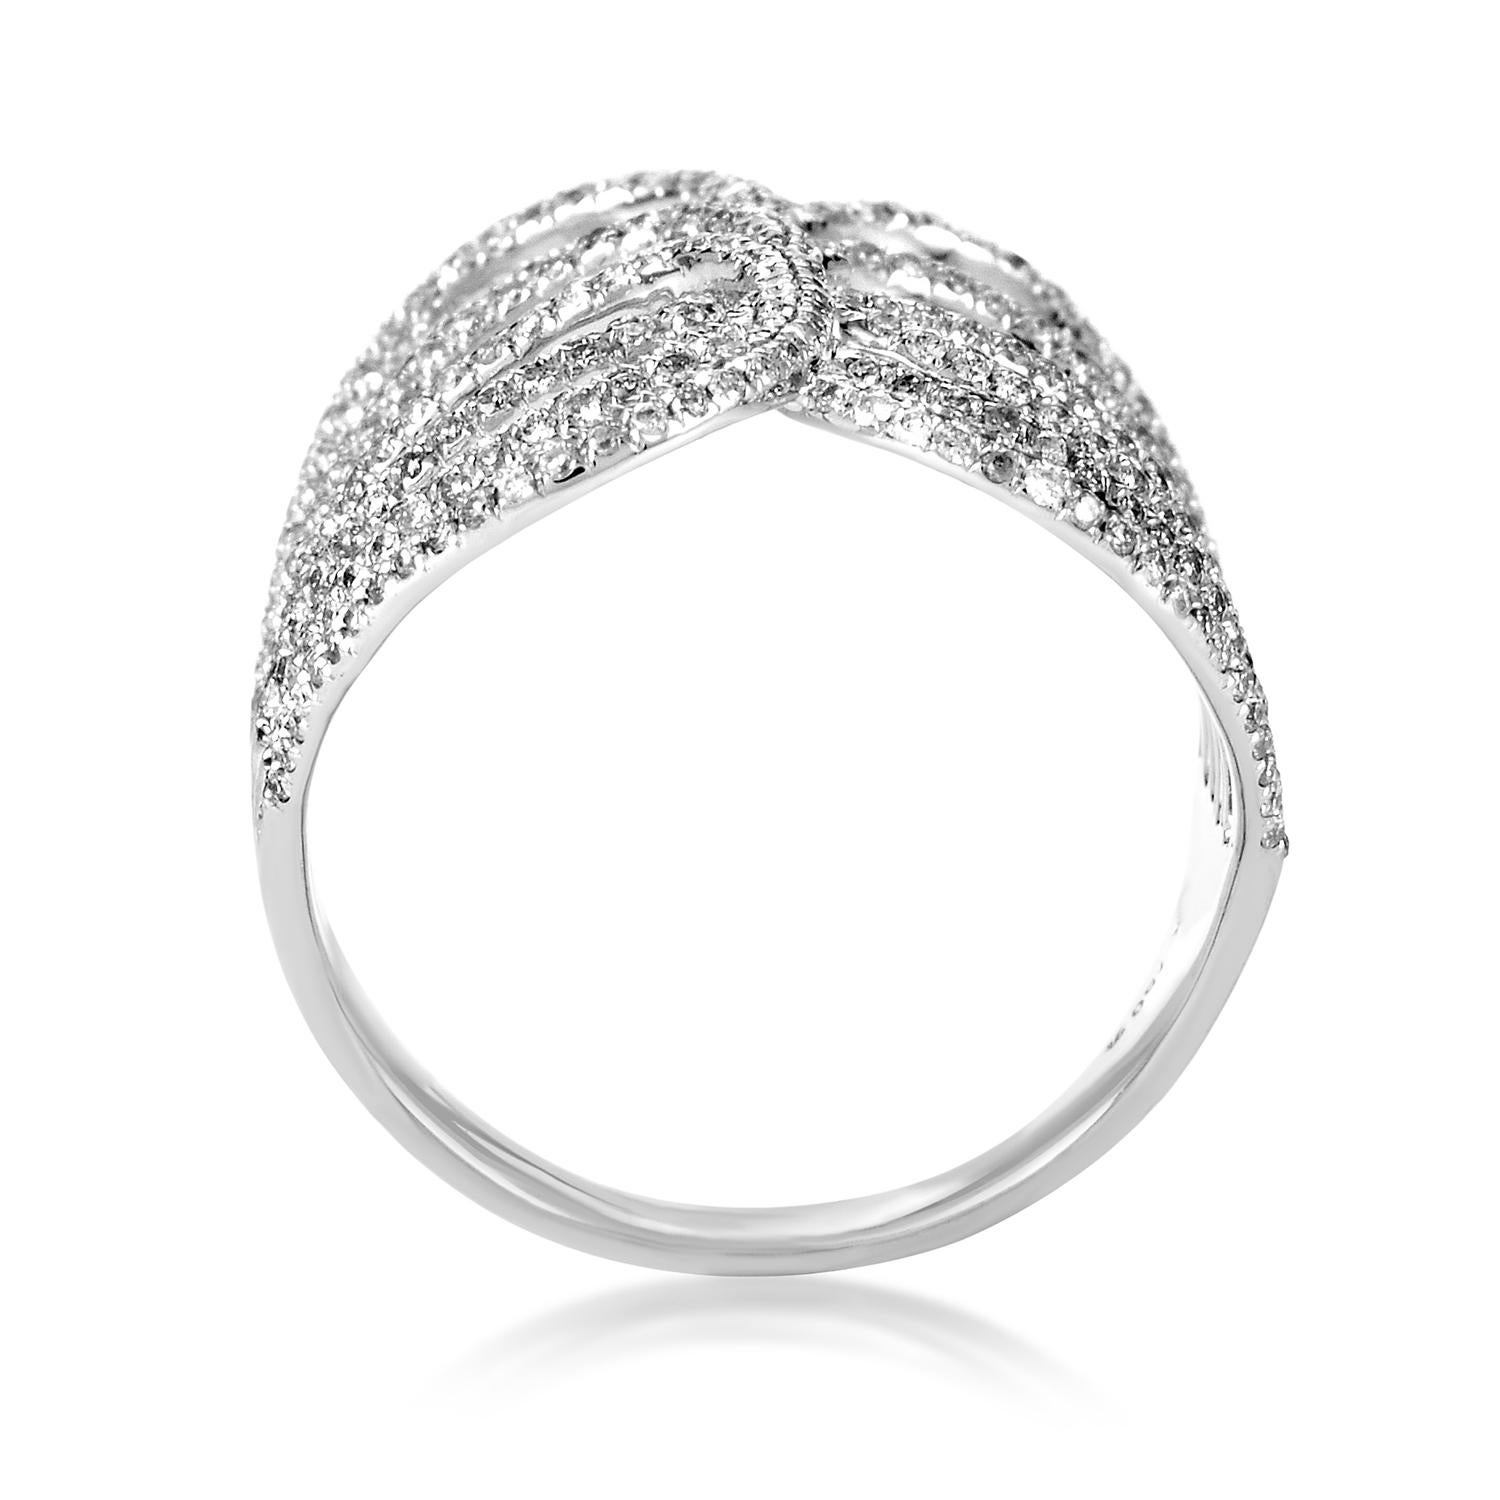 Laid out upon your finger in a pleasantly graceful manner, the fascinating shape of this enchanting 18K white gold ring is emphasized by the luxurious glisten of diamonds weighing in total 0.87ct.<Br/>Ring Top Dimensions: 25 x 20mm
